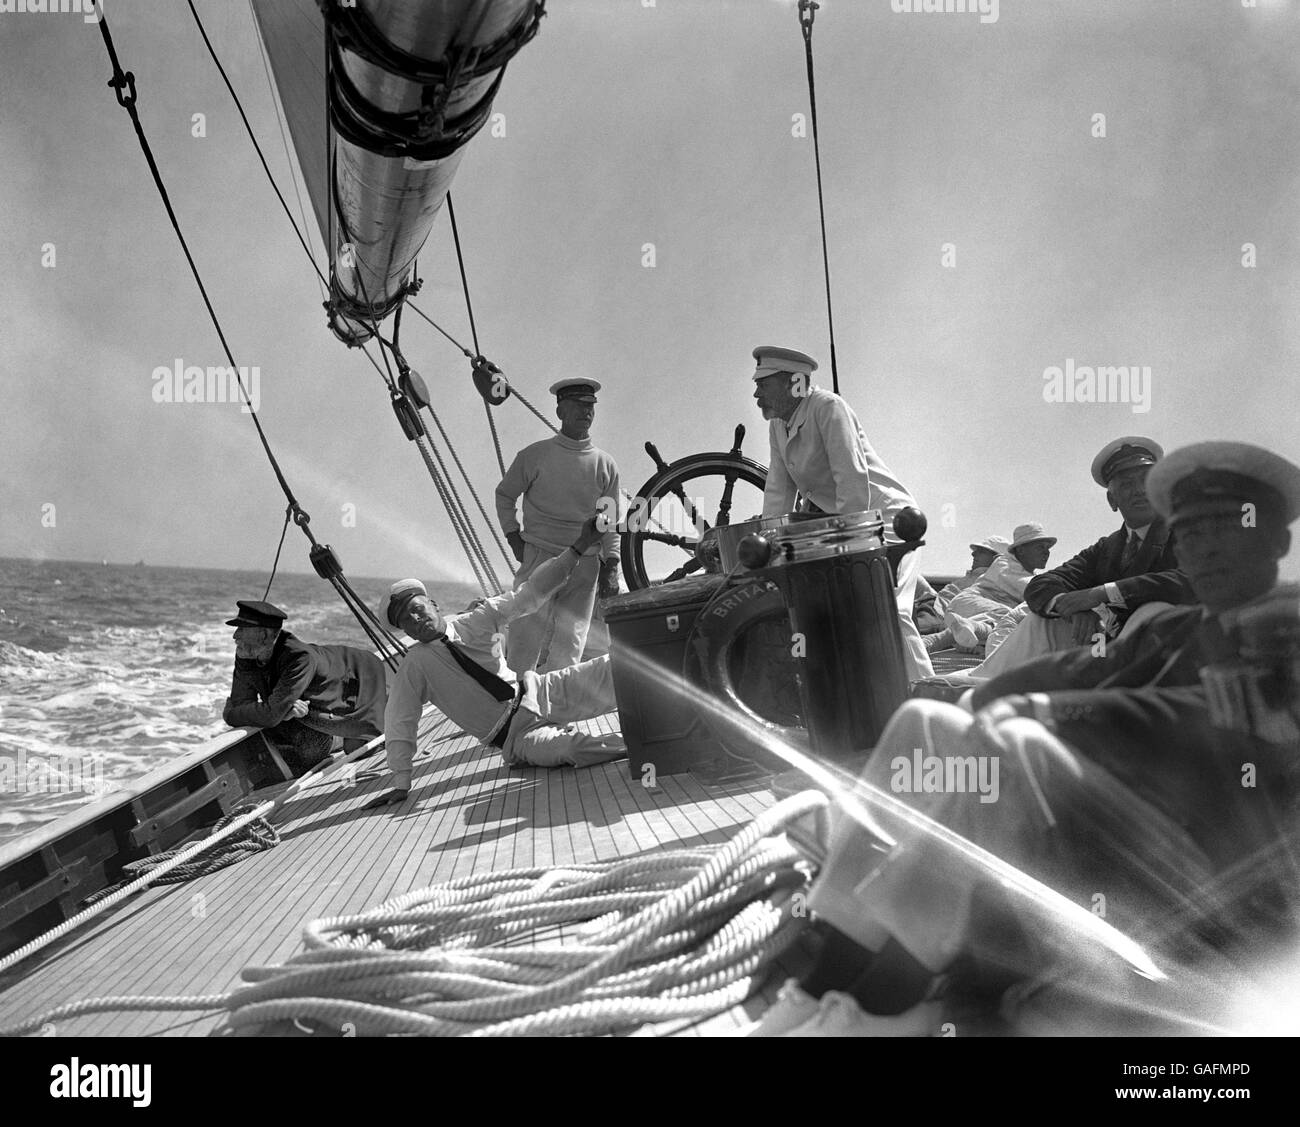 King George V on his yacht 'Britannia' during the racing at Cowes. Major Hunloke, the skipper, is at the wheel. Stock Photo